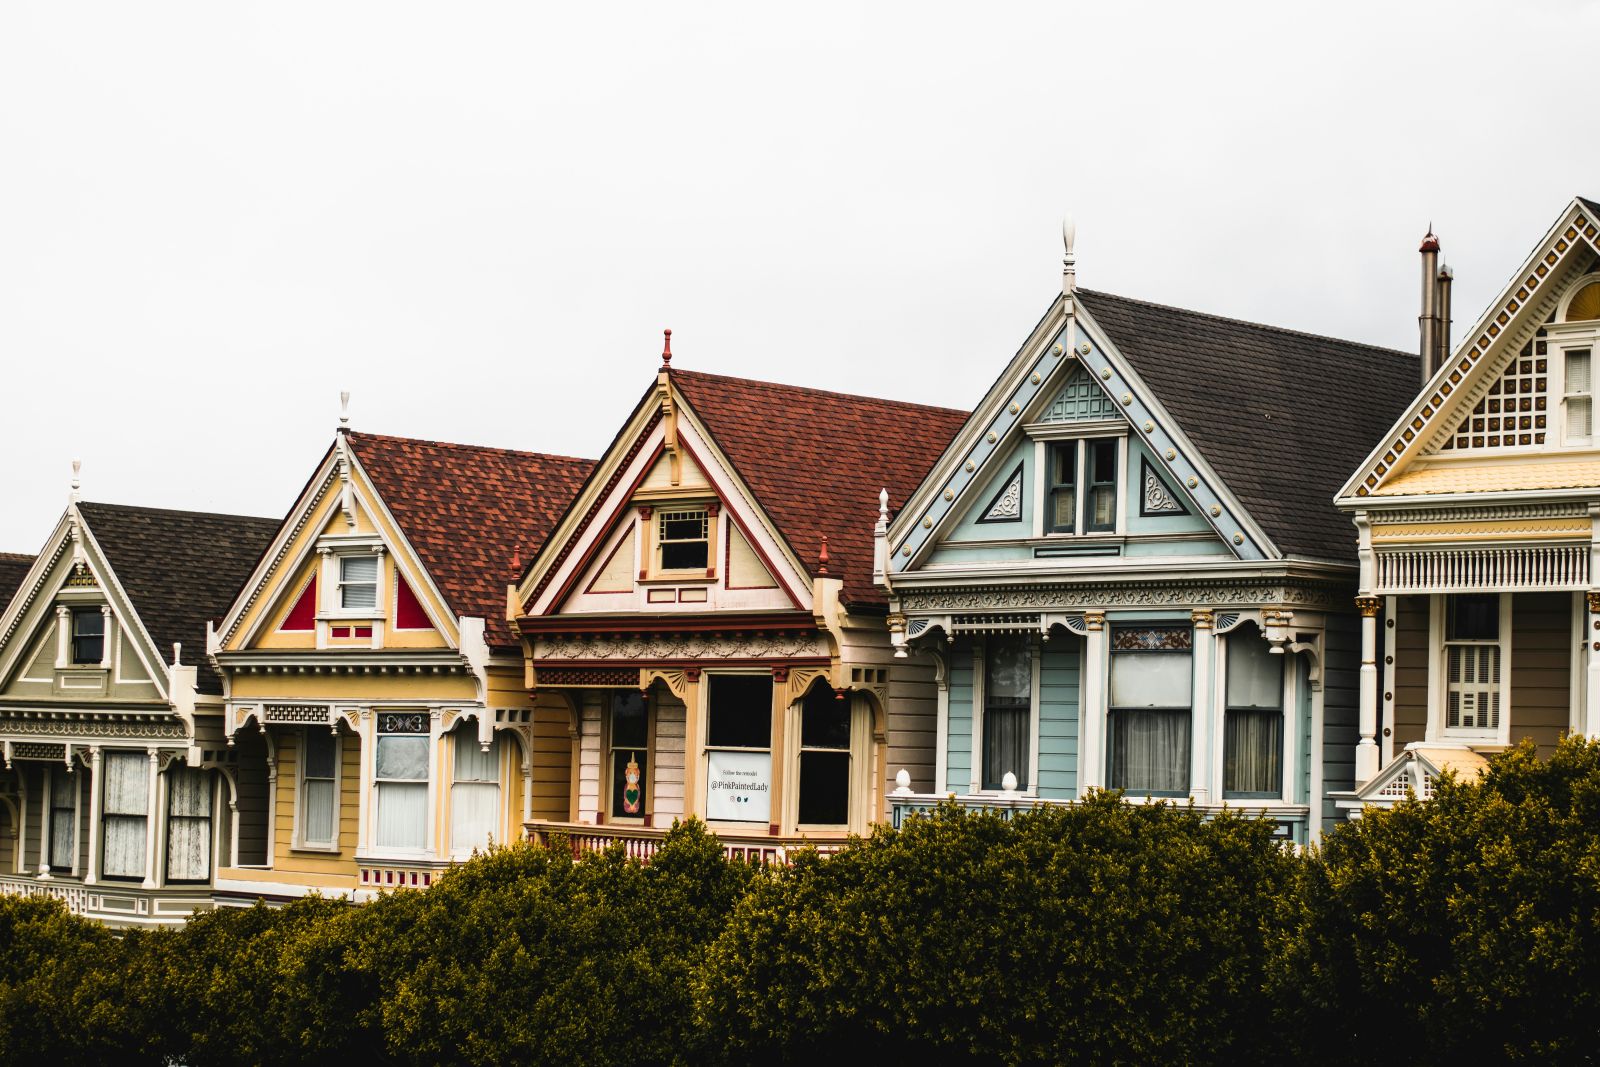 Housing and Real Estate - Photo by Alec Krum on Unsplash